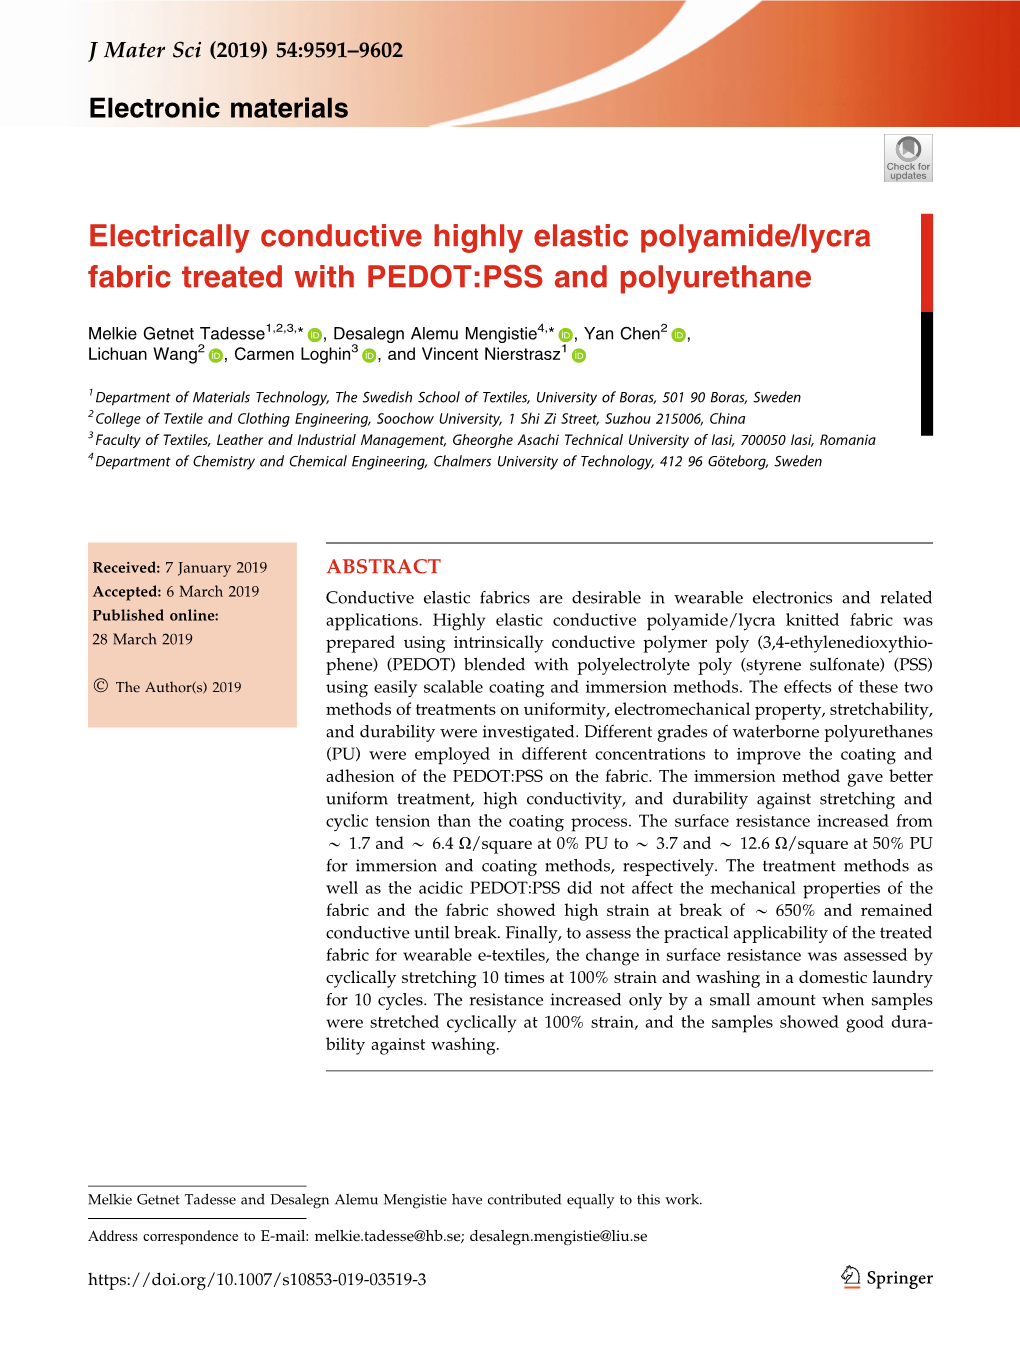 Electrically Conductive Highly Elastic Polyamide/Lycra Fabric Treated with PEDOT:PSS and Polyurethane